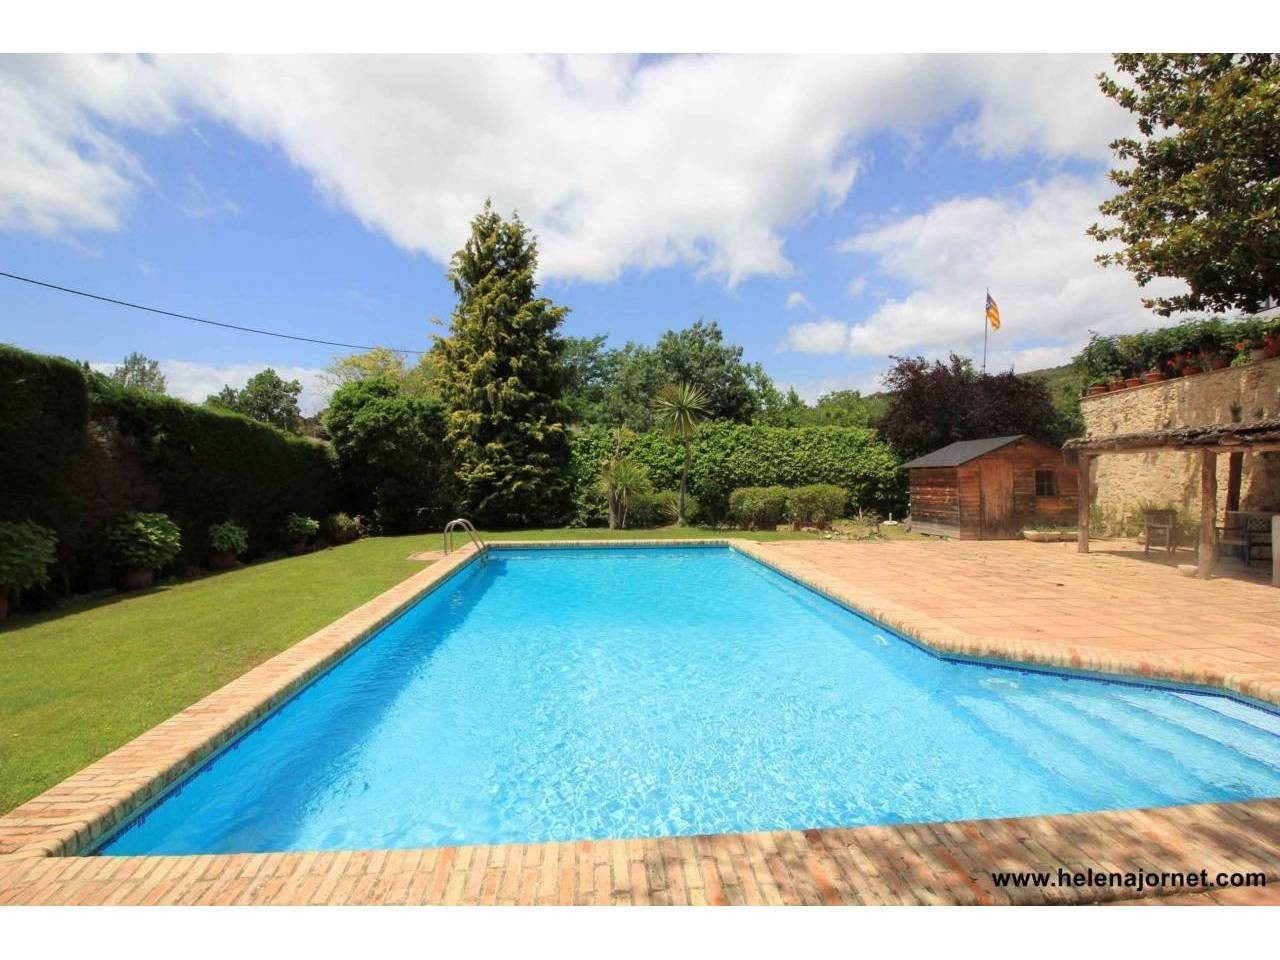 Exclusive Catalan farmhouse totally refurbished with swimming pool and wonderful garden - 2388